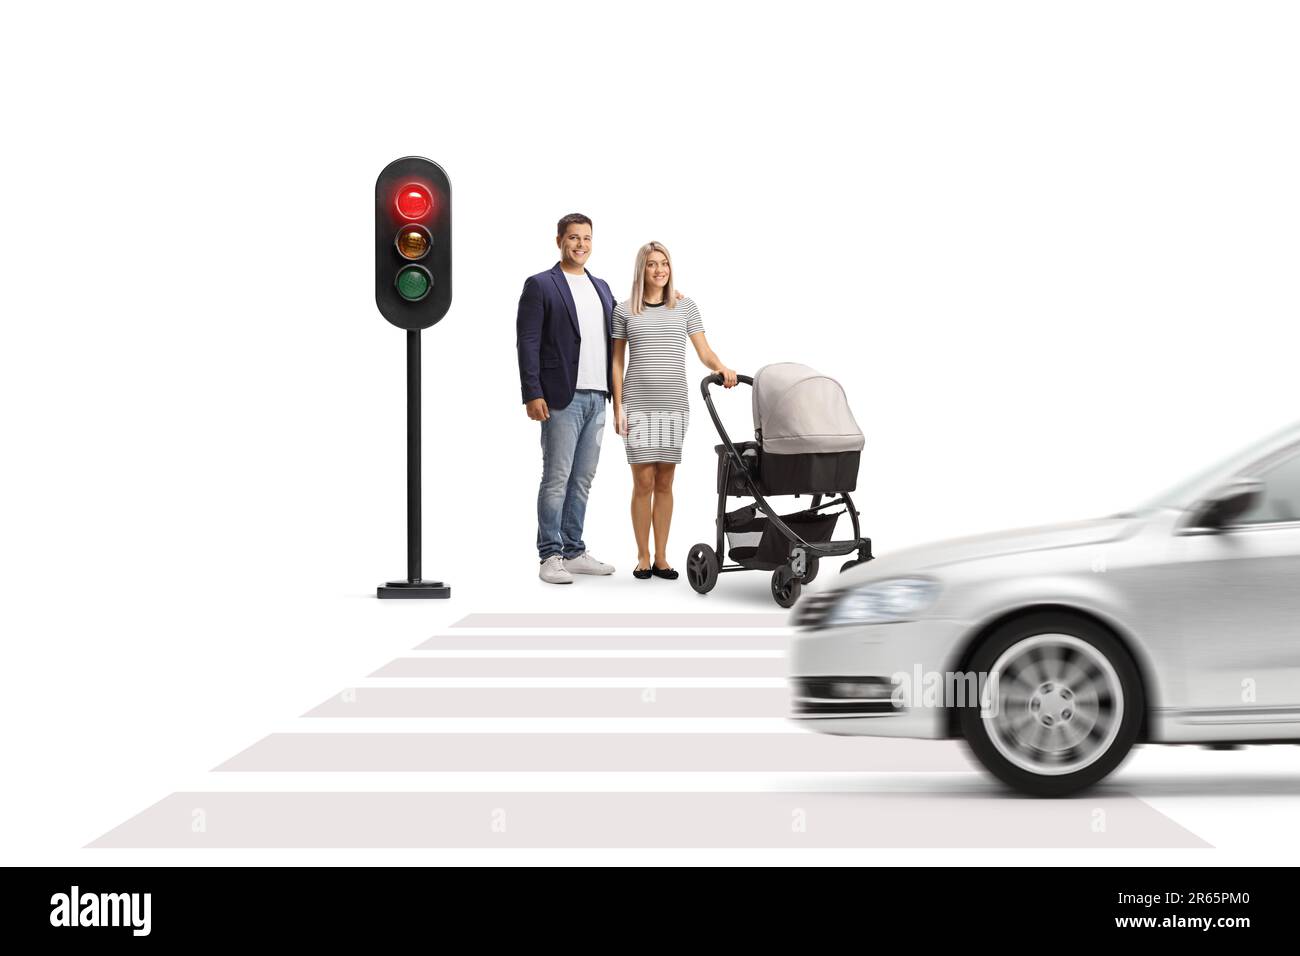 Couple with a baby stroller waiting at traffic lights isolated on white background Stock Photo